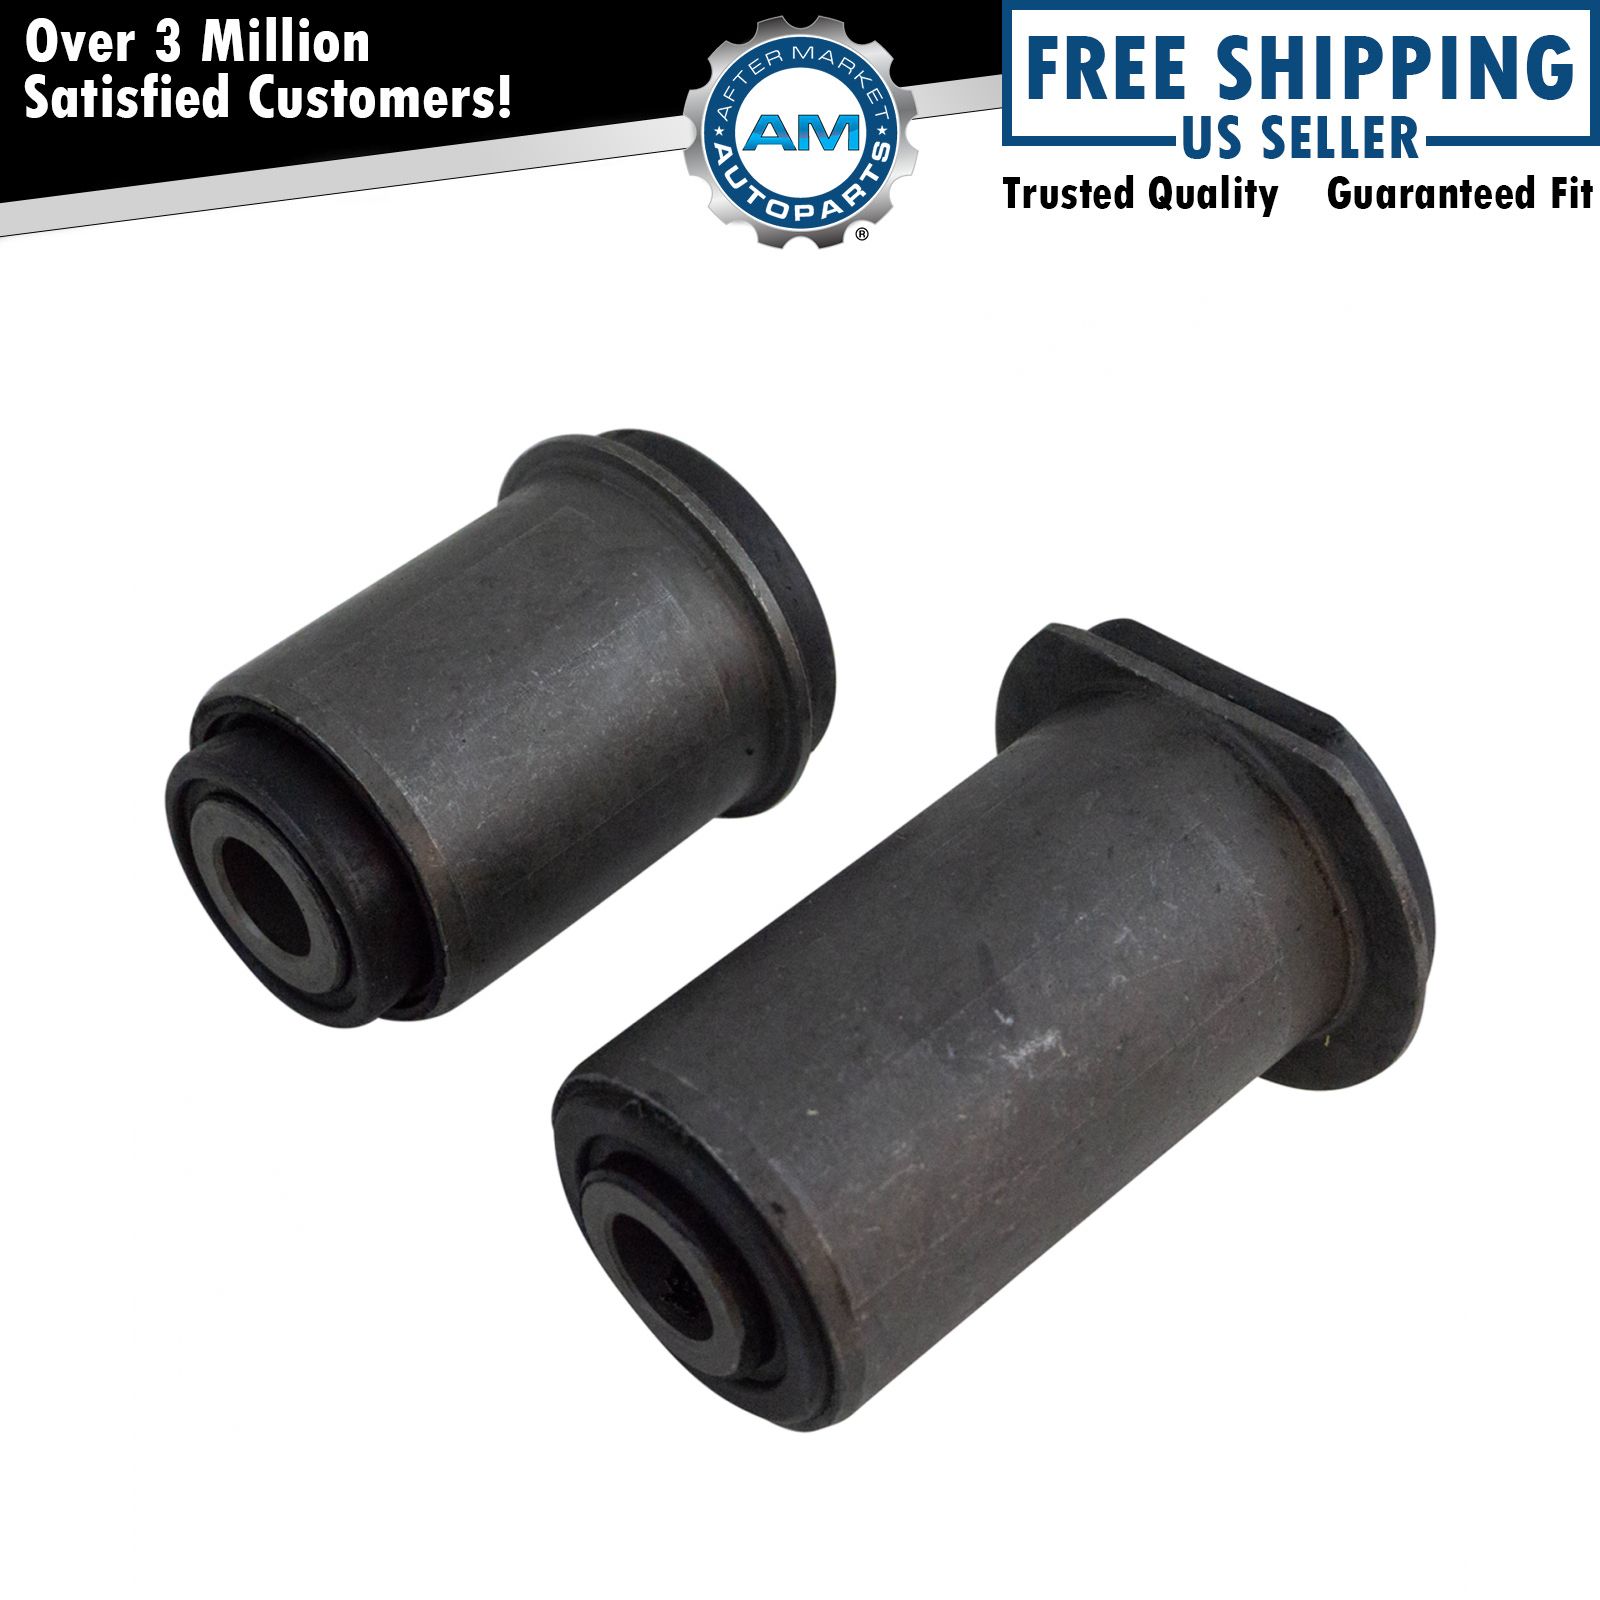 Moog K6329 Front Lower Control Arm Bushing Kit for GM Pickup Truck SUV New